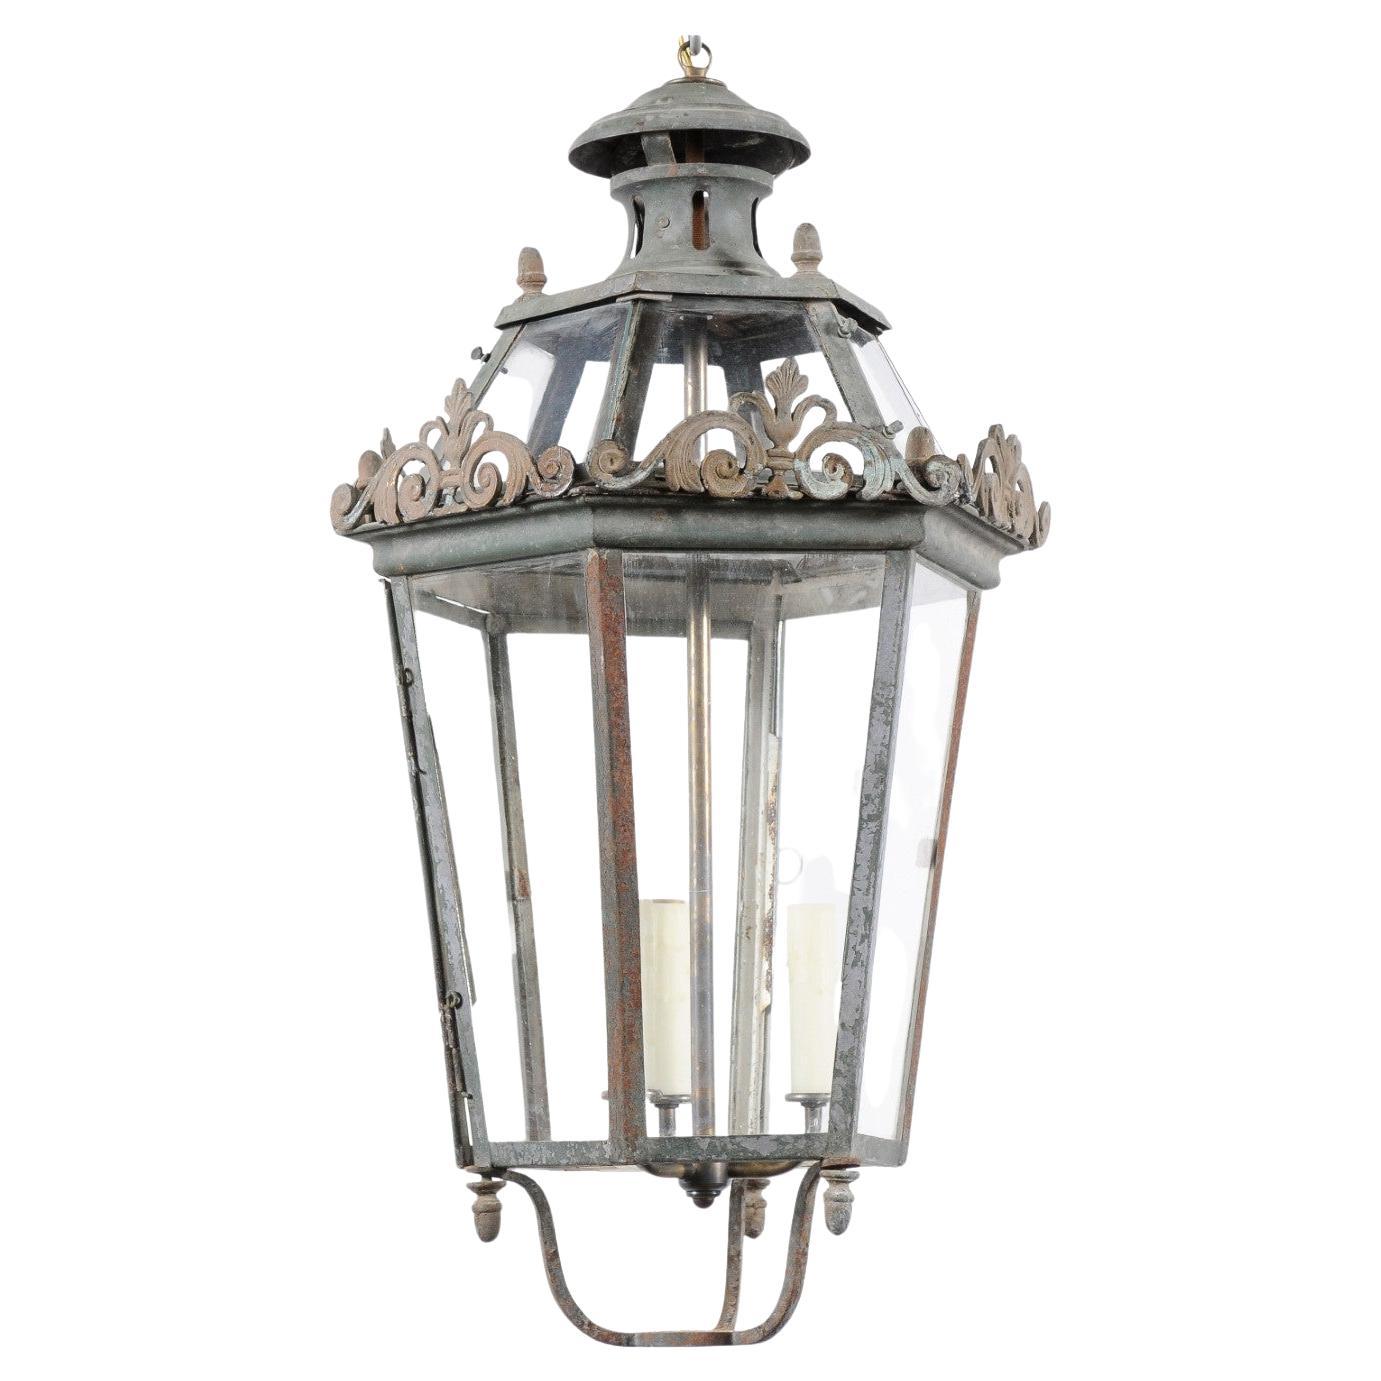  Venetian Painted Iron Street Lantern with 3 Lights, Late 19th Century For Sale